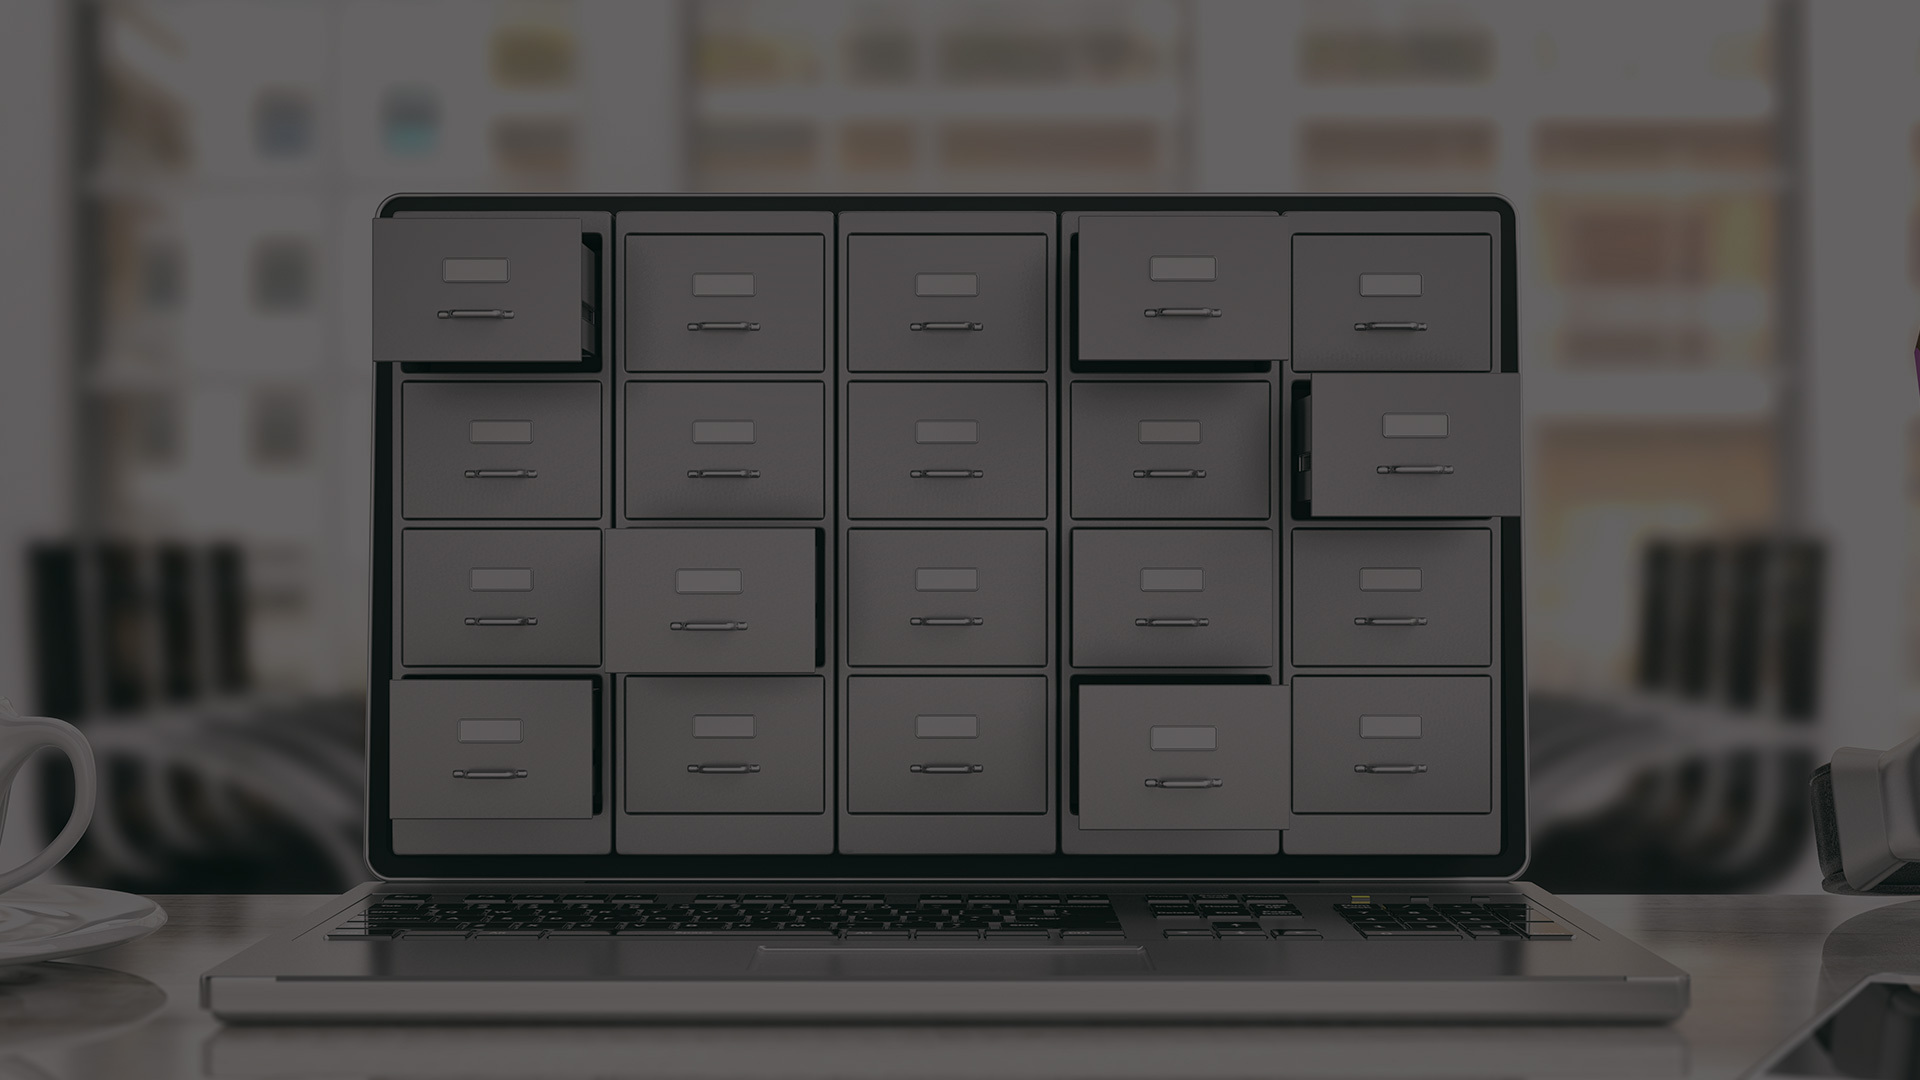 Laptop screen showing filing cabinets